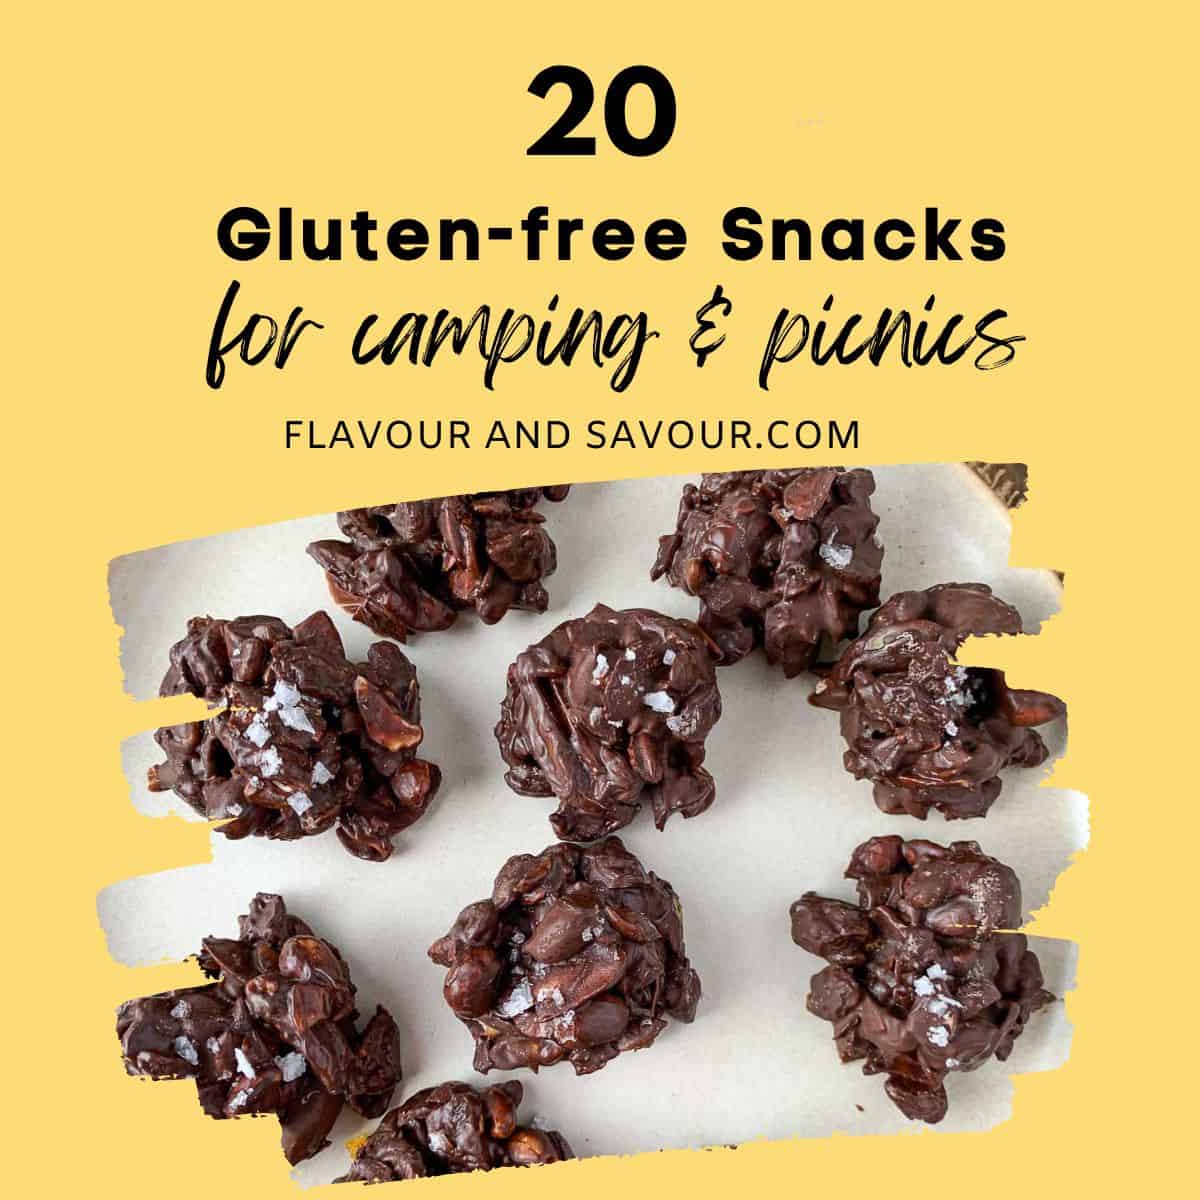 Image with text for 20 gluten-free snacks for camping and picnics